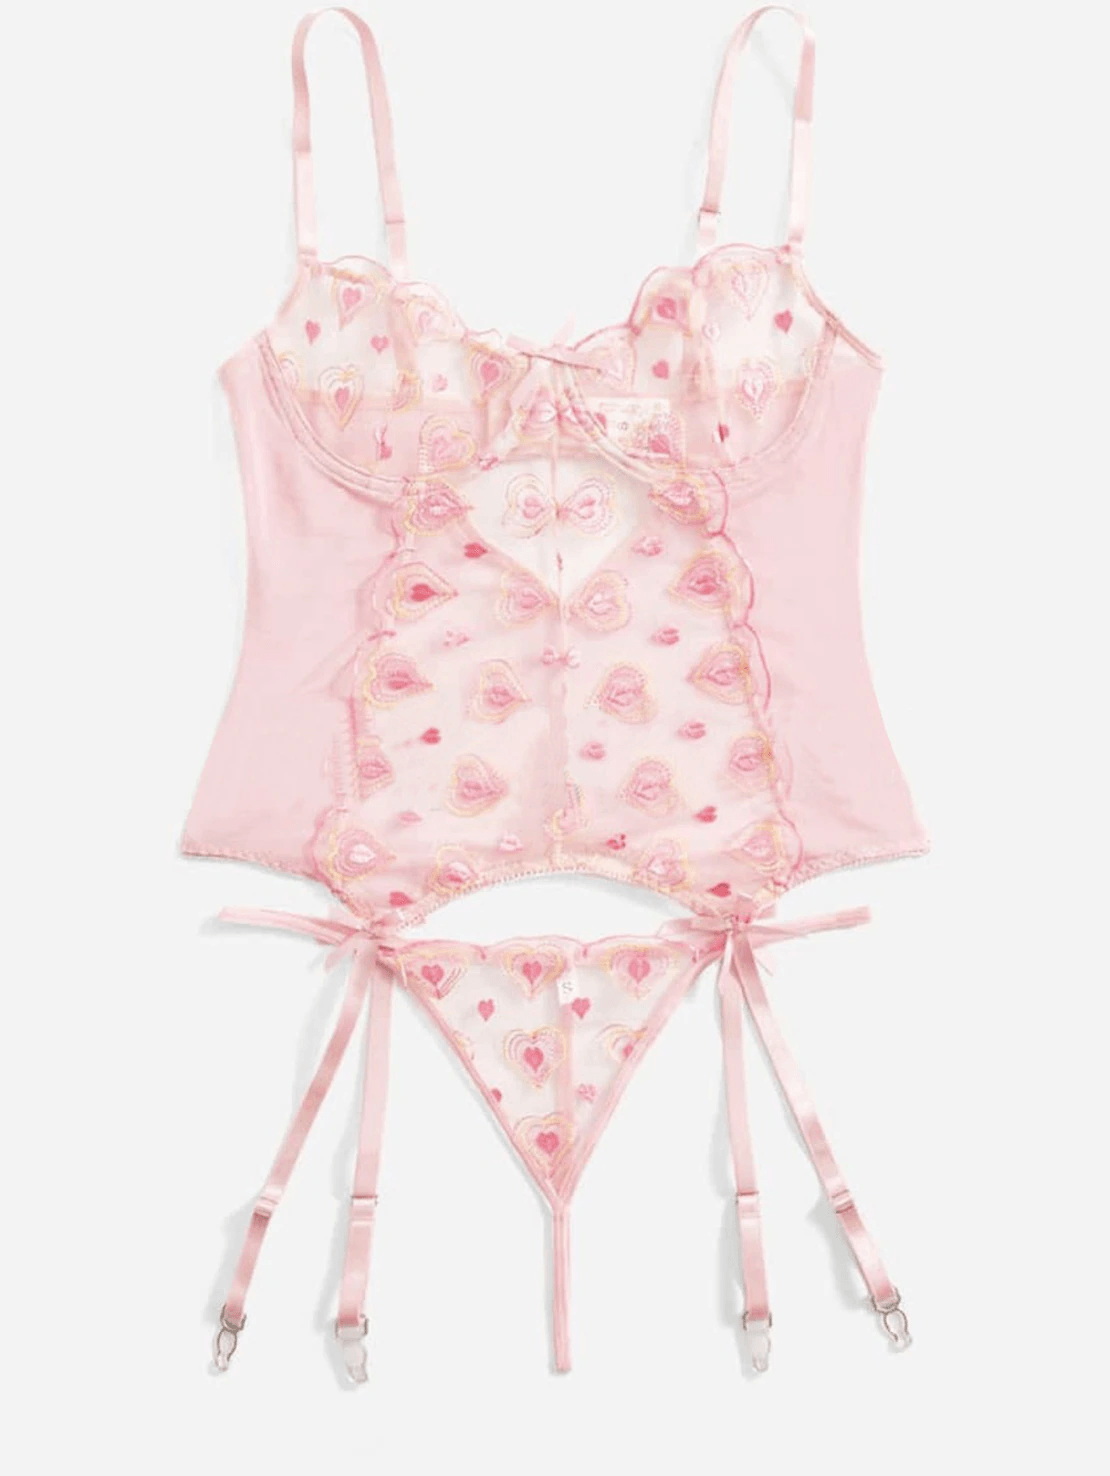 Cathy See Through Heart Shaped Lingerie Set - Hot fashionista